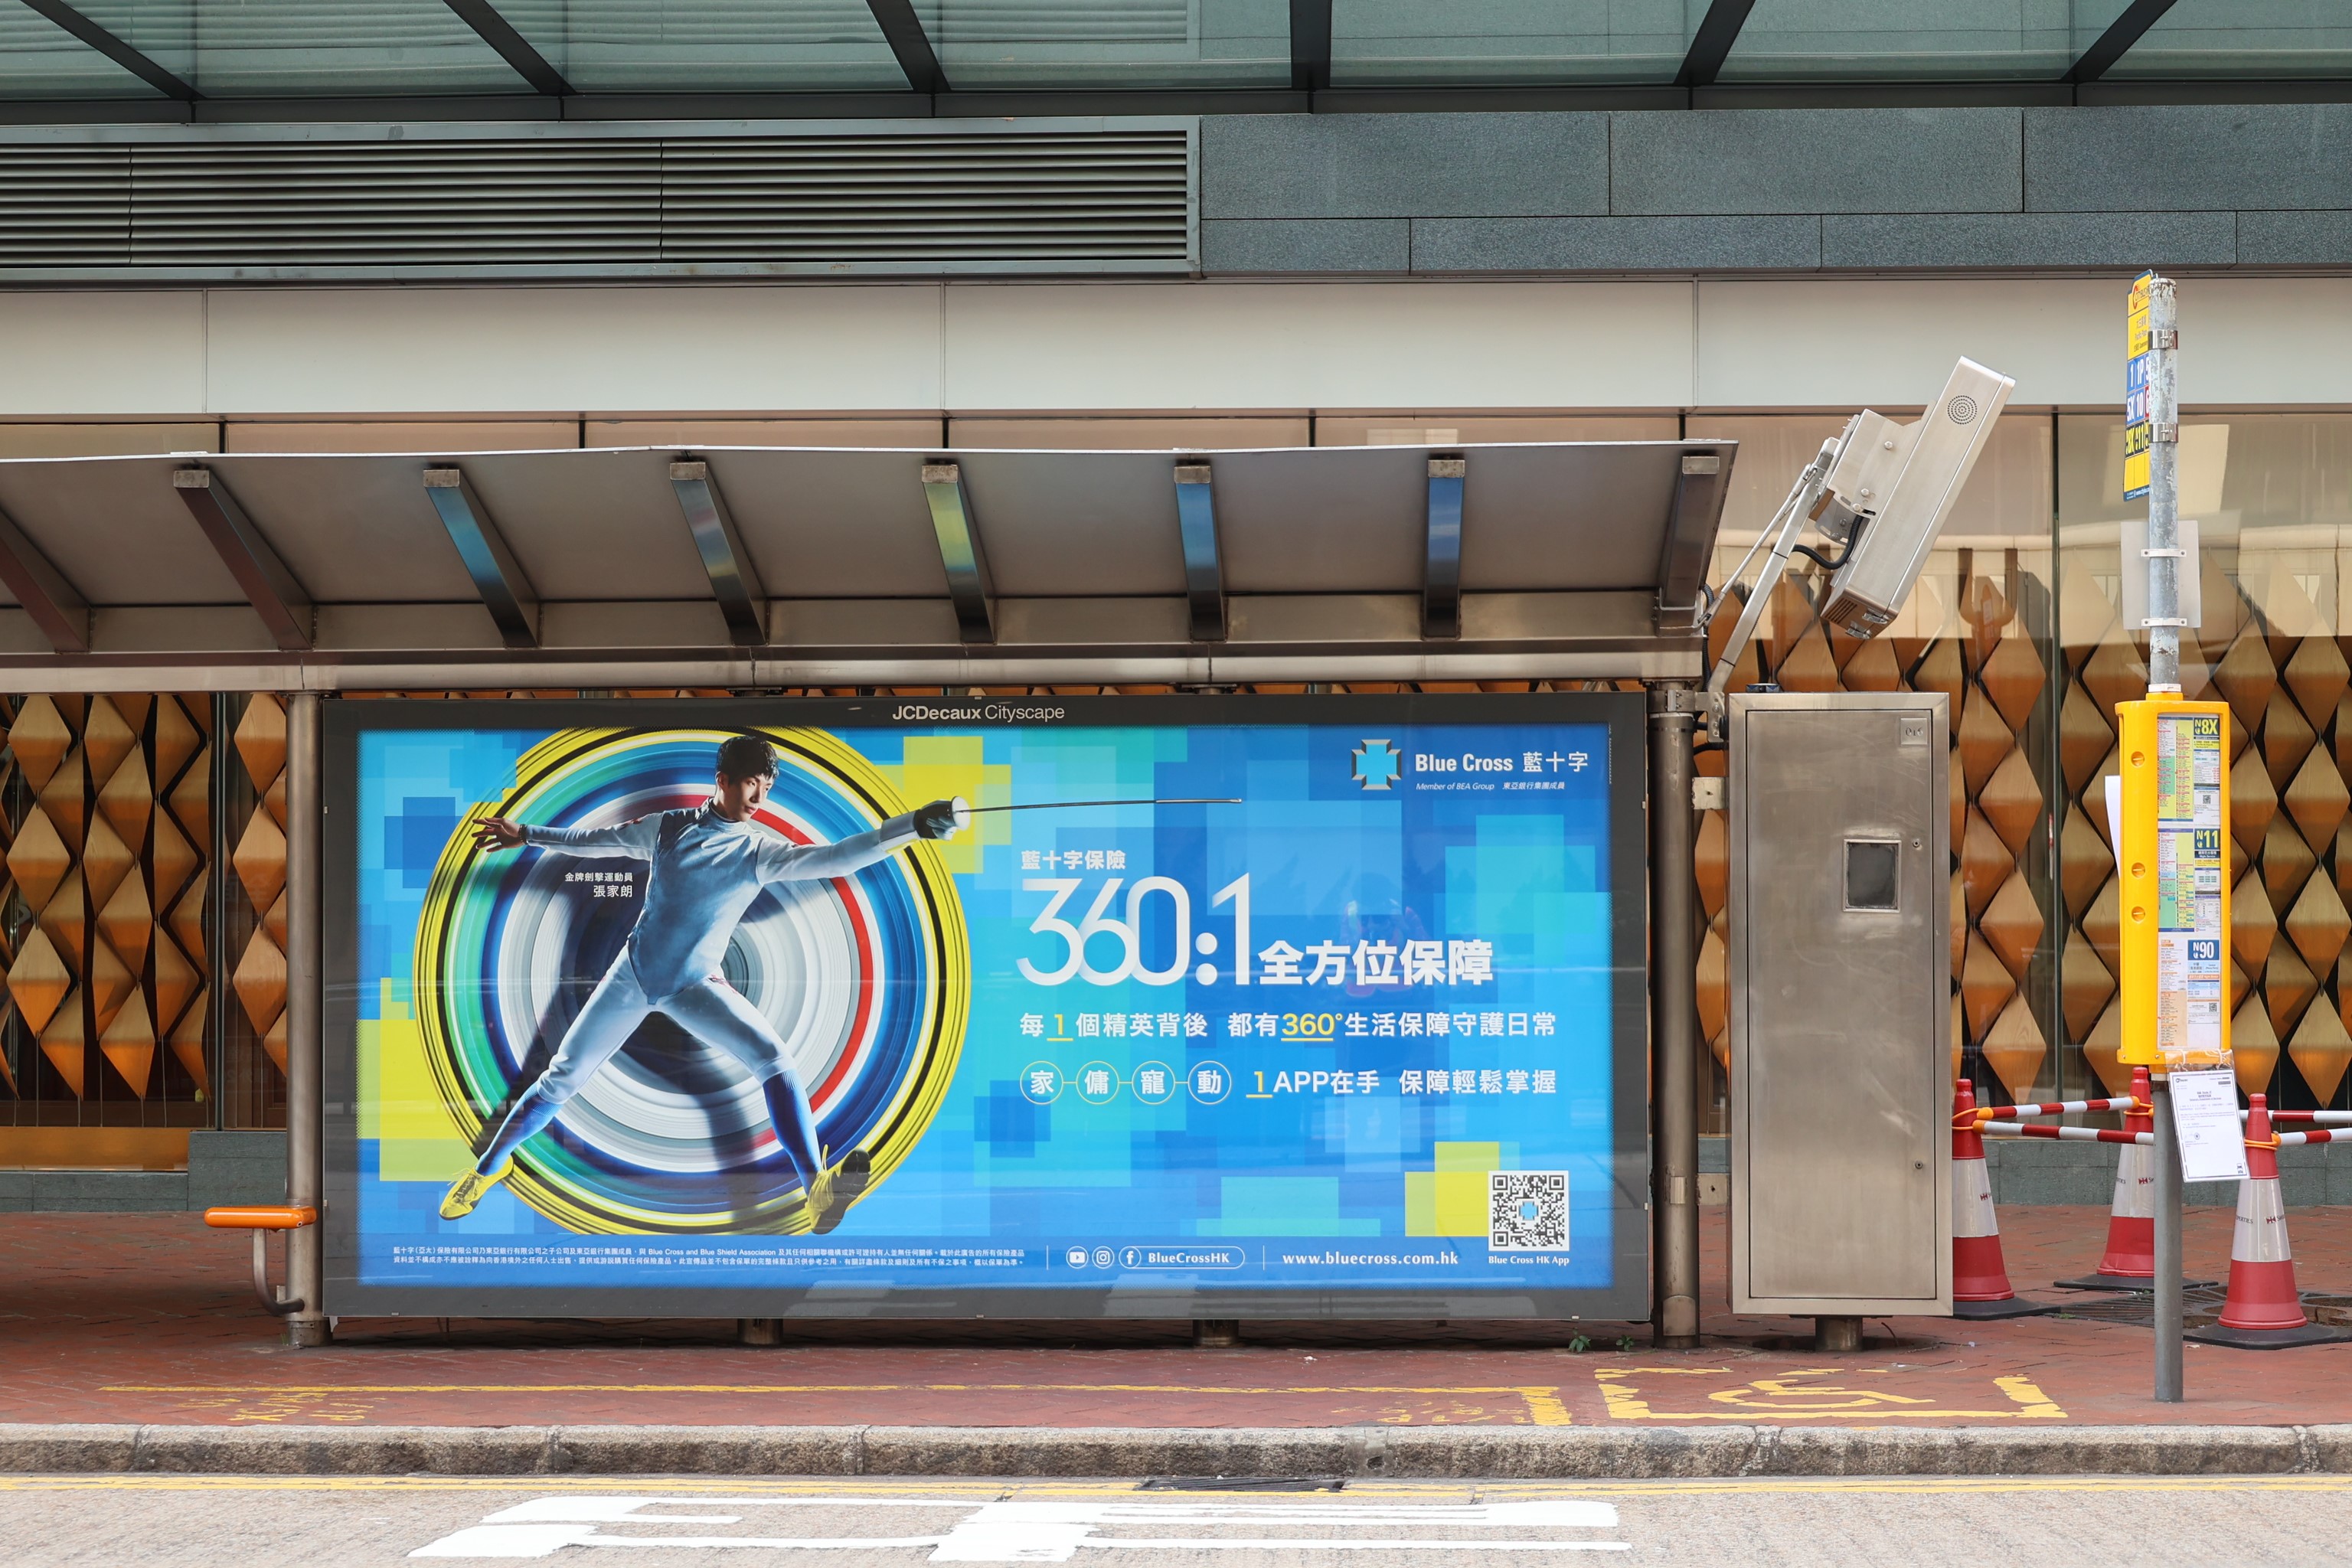 Blue Cross launched a branding campaign themed 